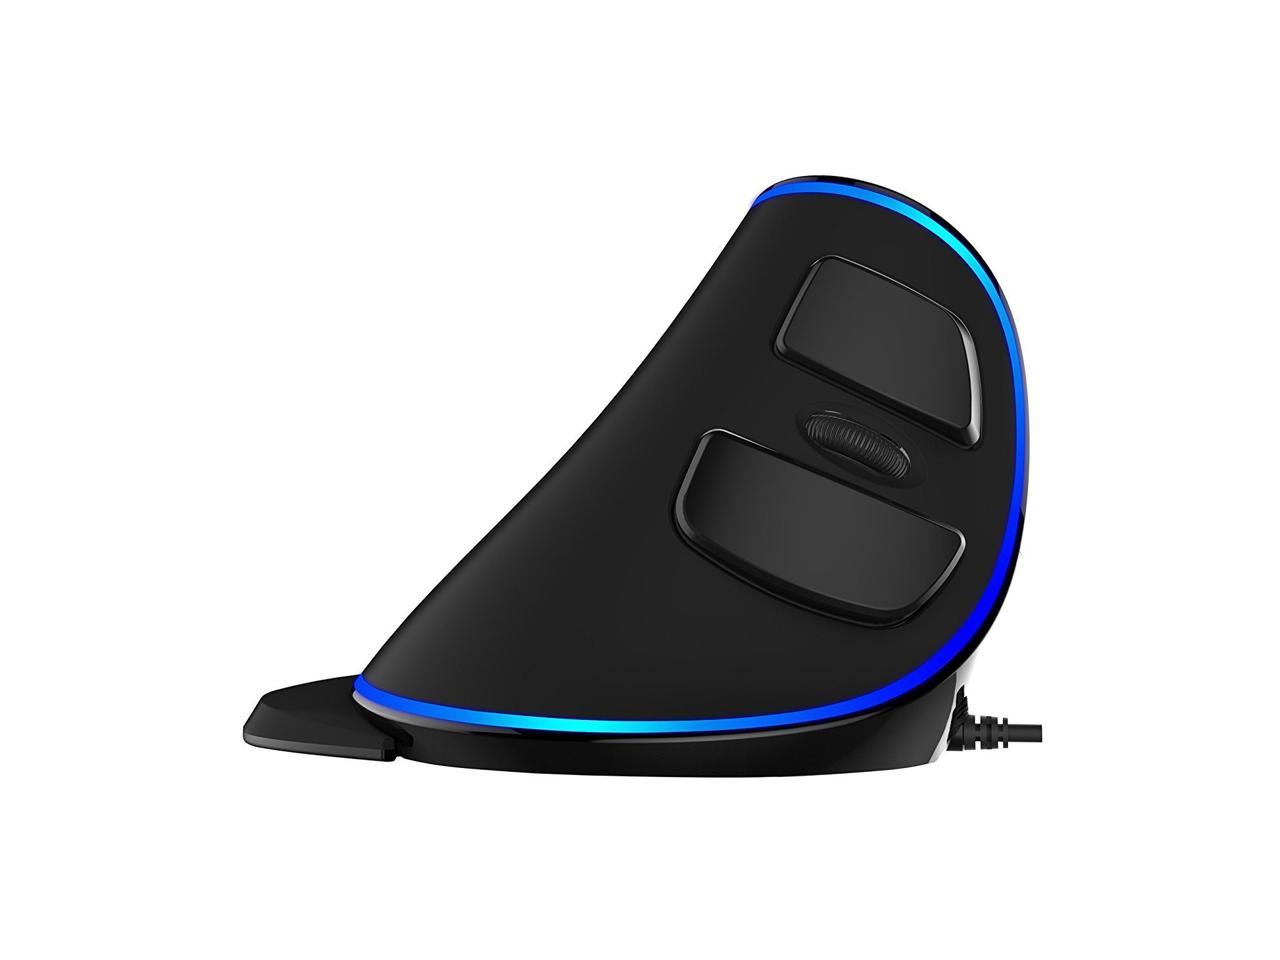 J-Tech Digital Wired Ergonomic Vertical USB Mouse with Adjustable